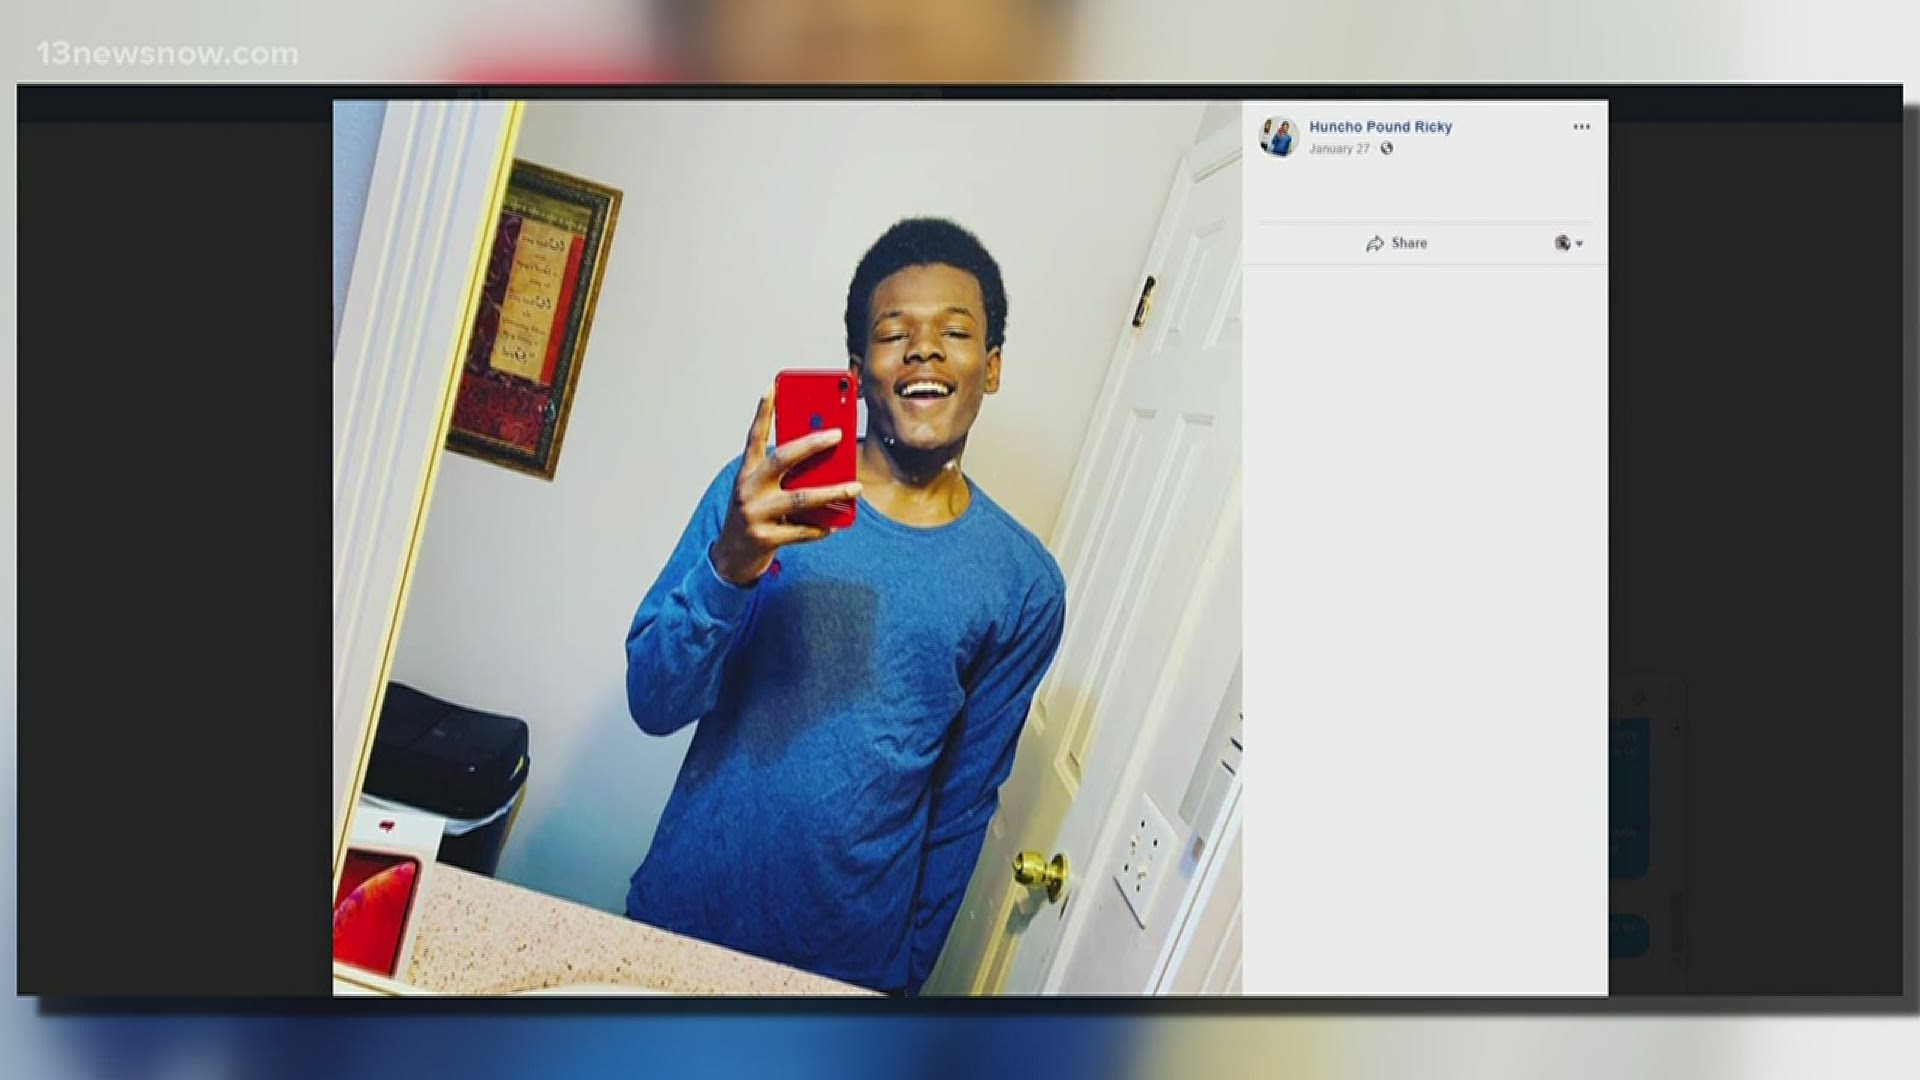 19-year-old Ricky Devon Brooks Jr. of Newport News was found shot to death inside a vehicle Tuesday night.